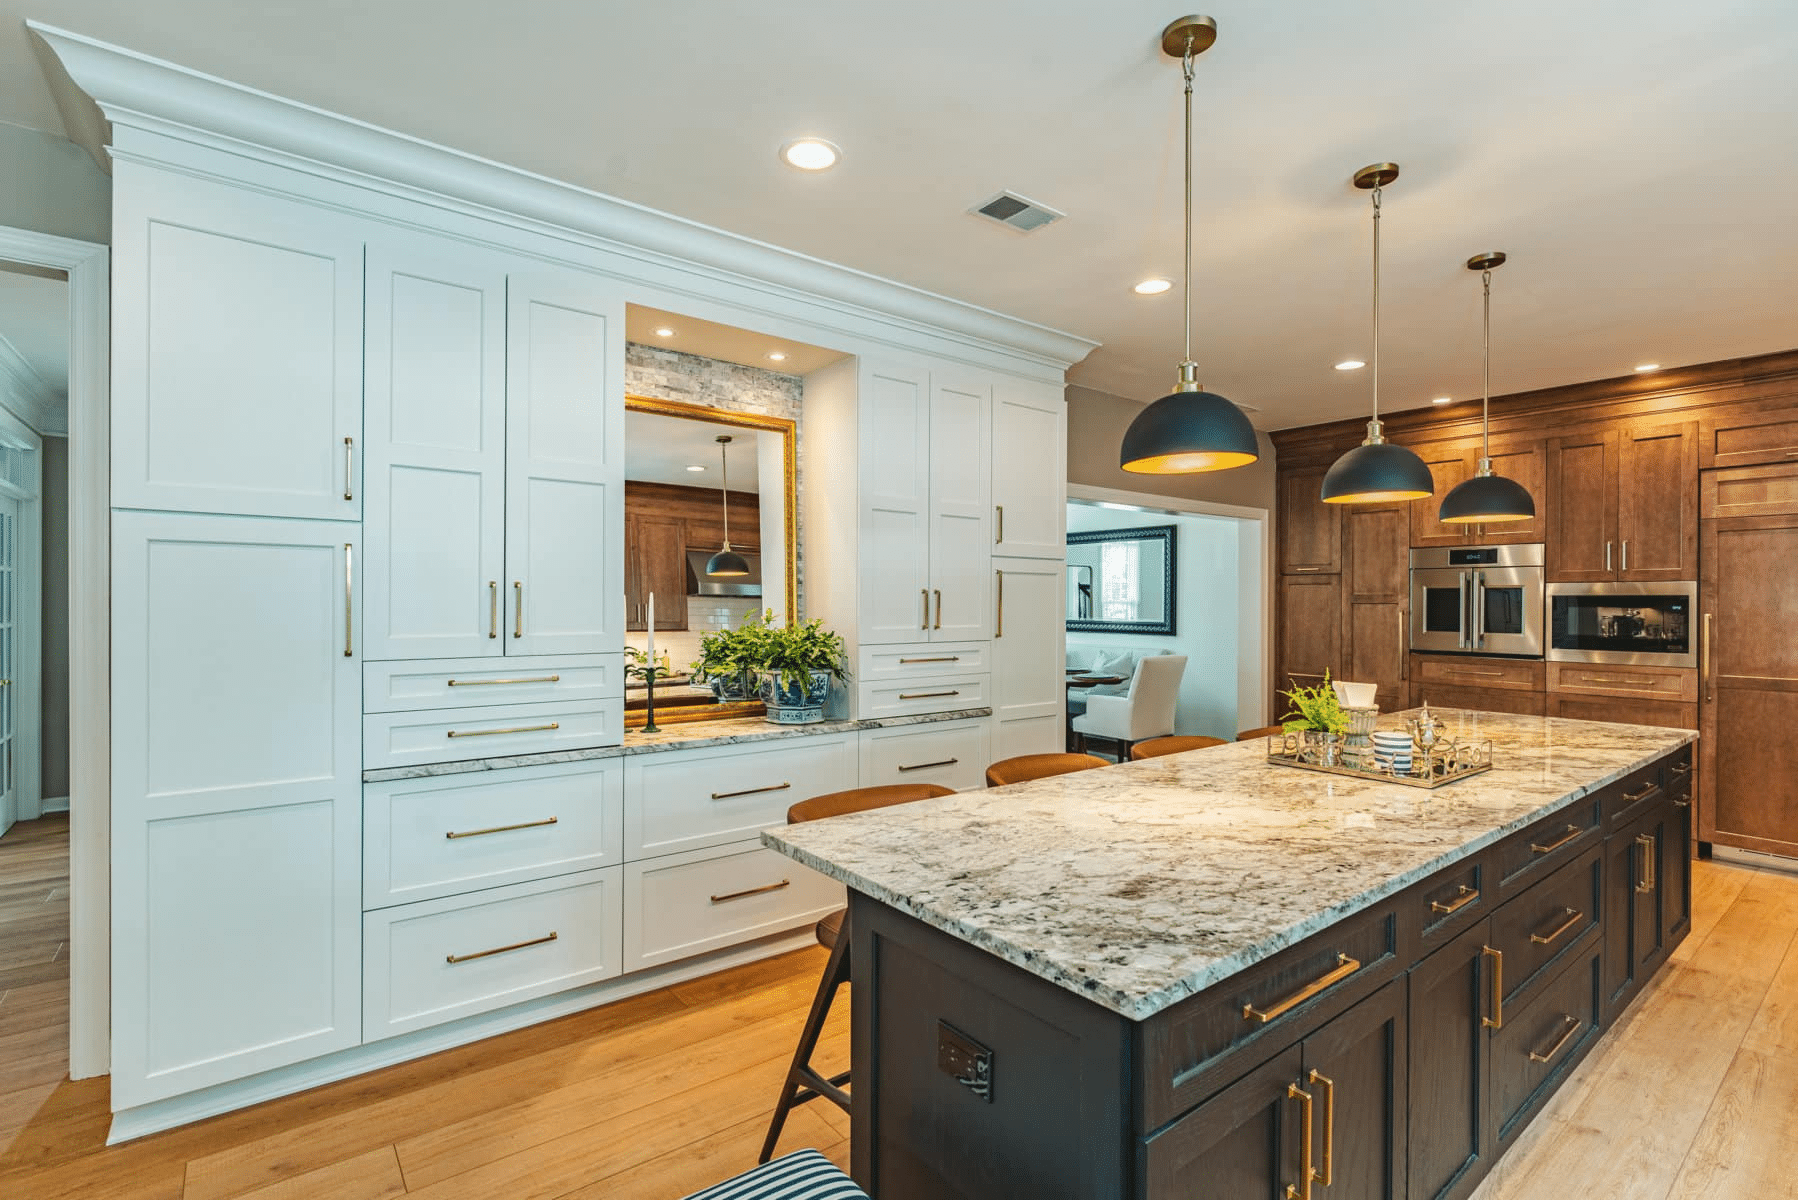 Two-tone kitchen cabinets with marble countertops